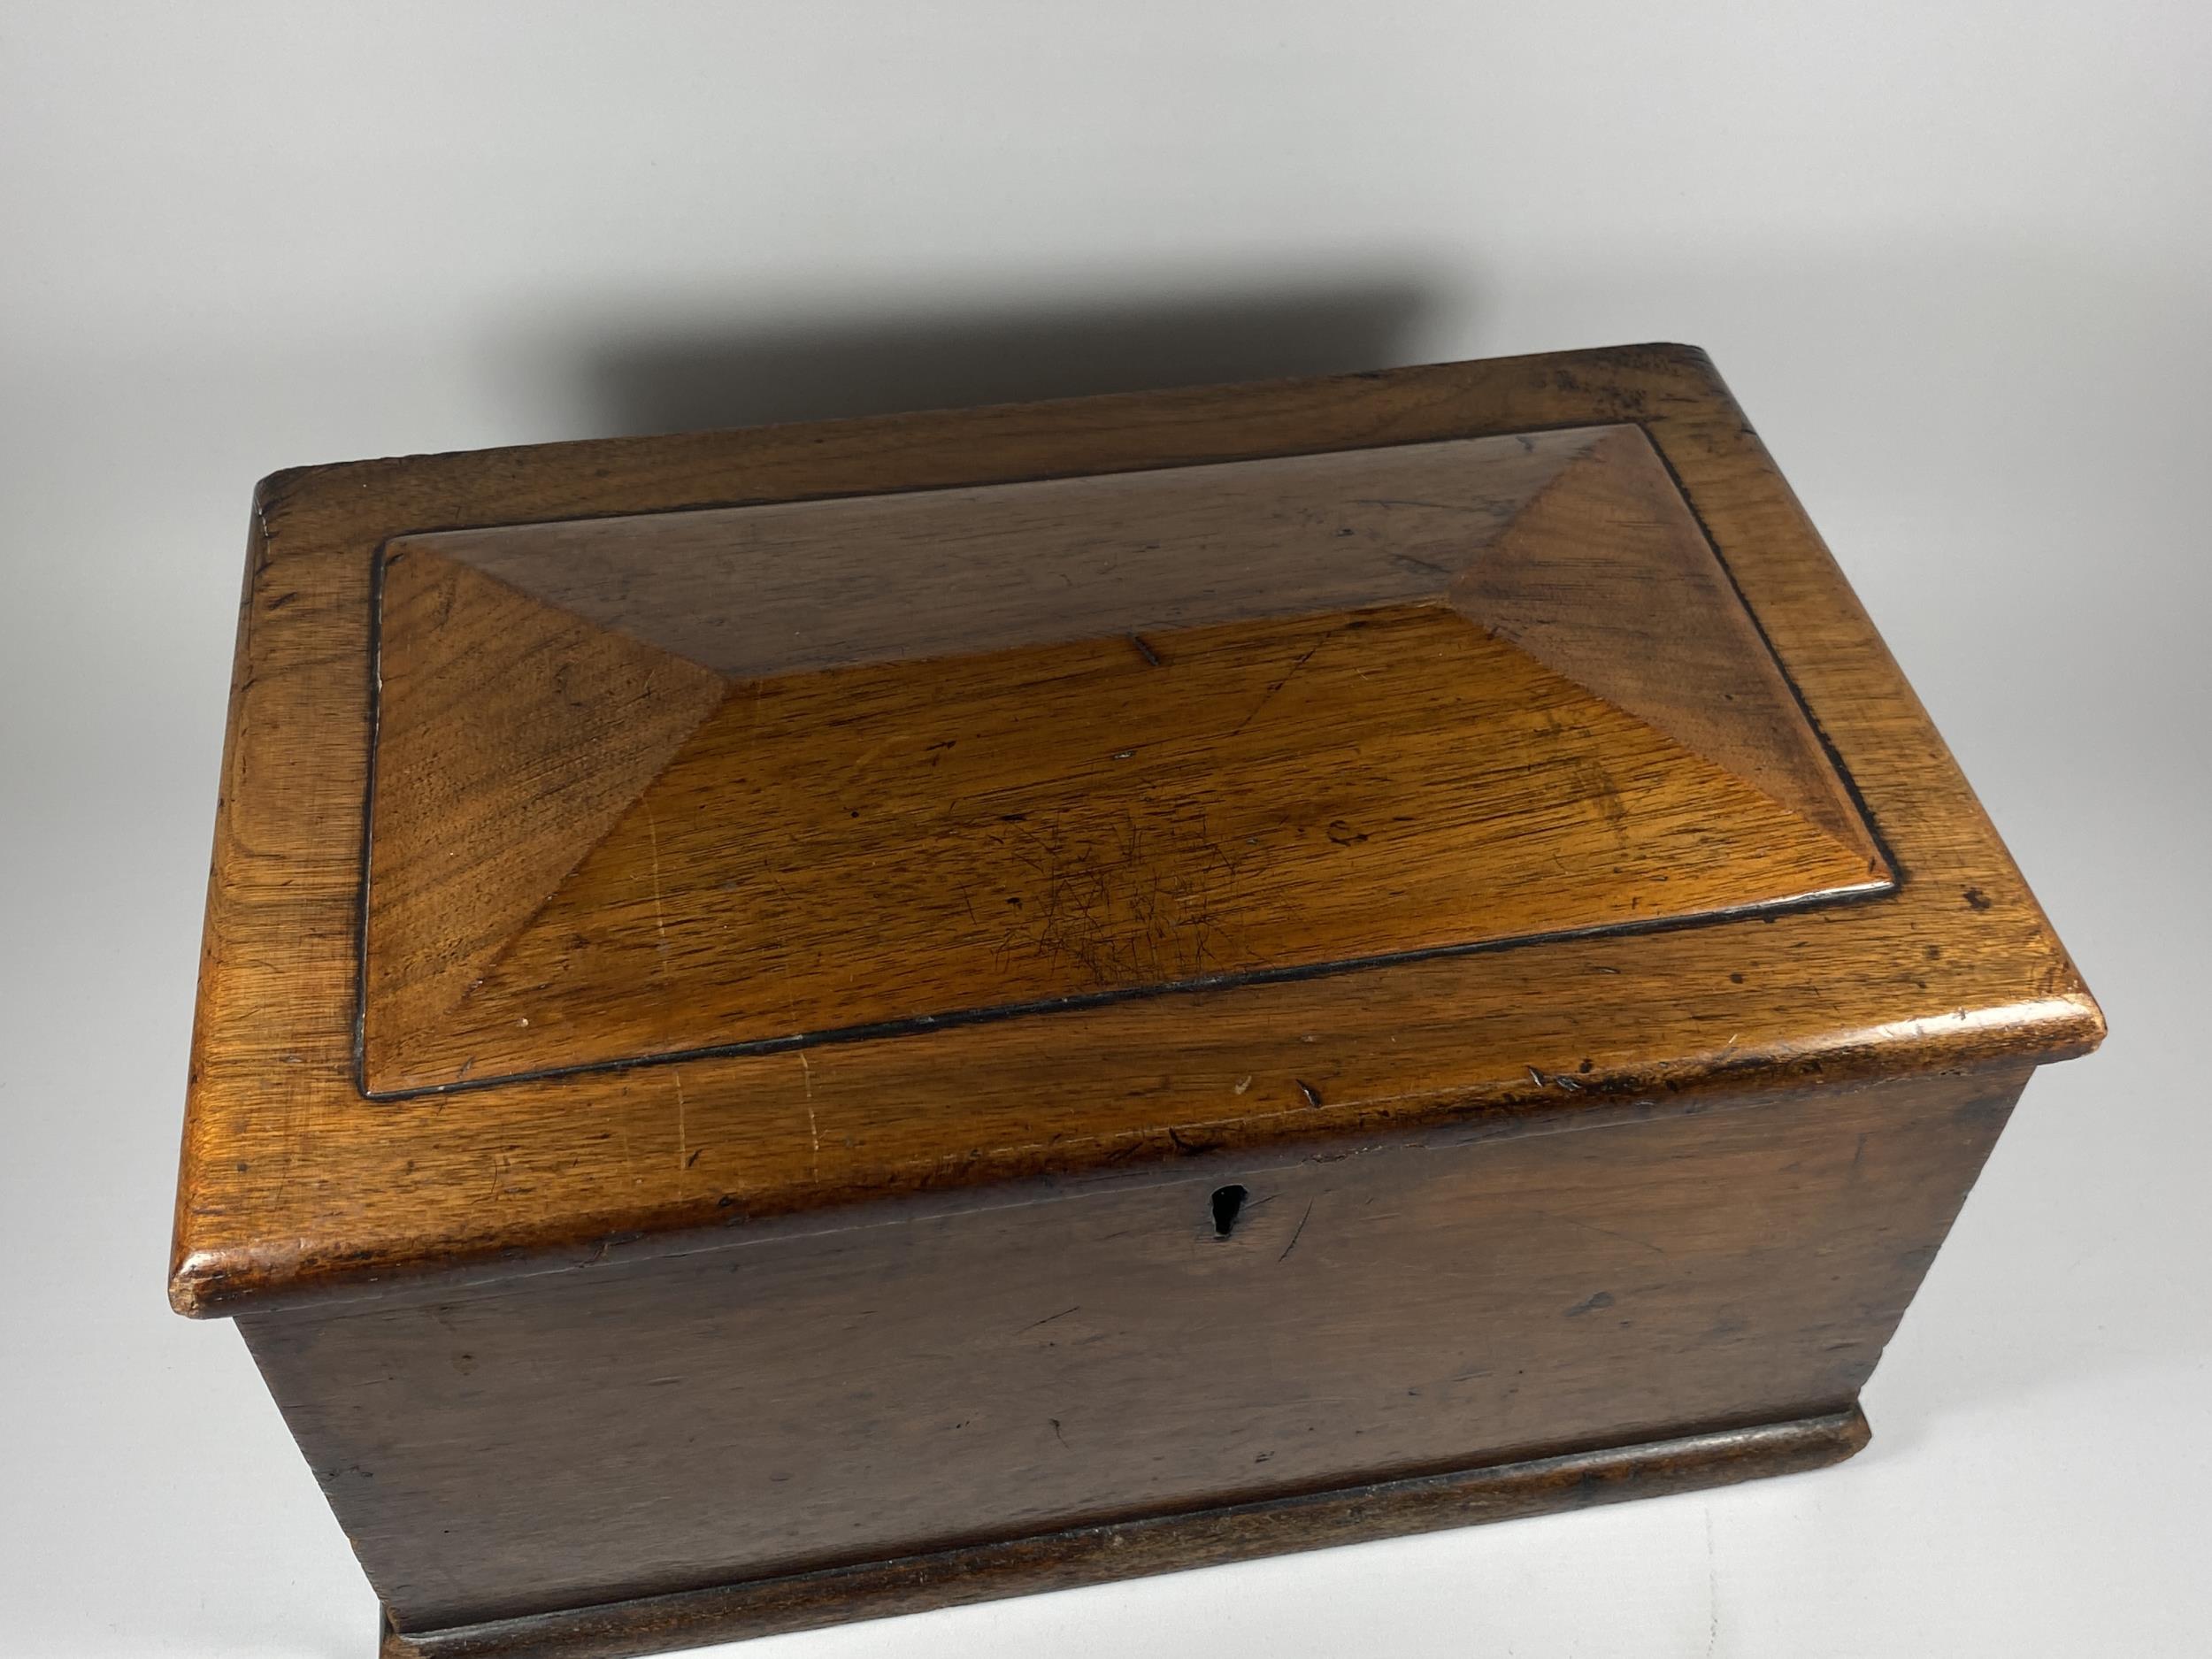 AN EARLY 20TH CENTURY OAK WOODEN STORAGE BOX - Image 2 of 4